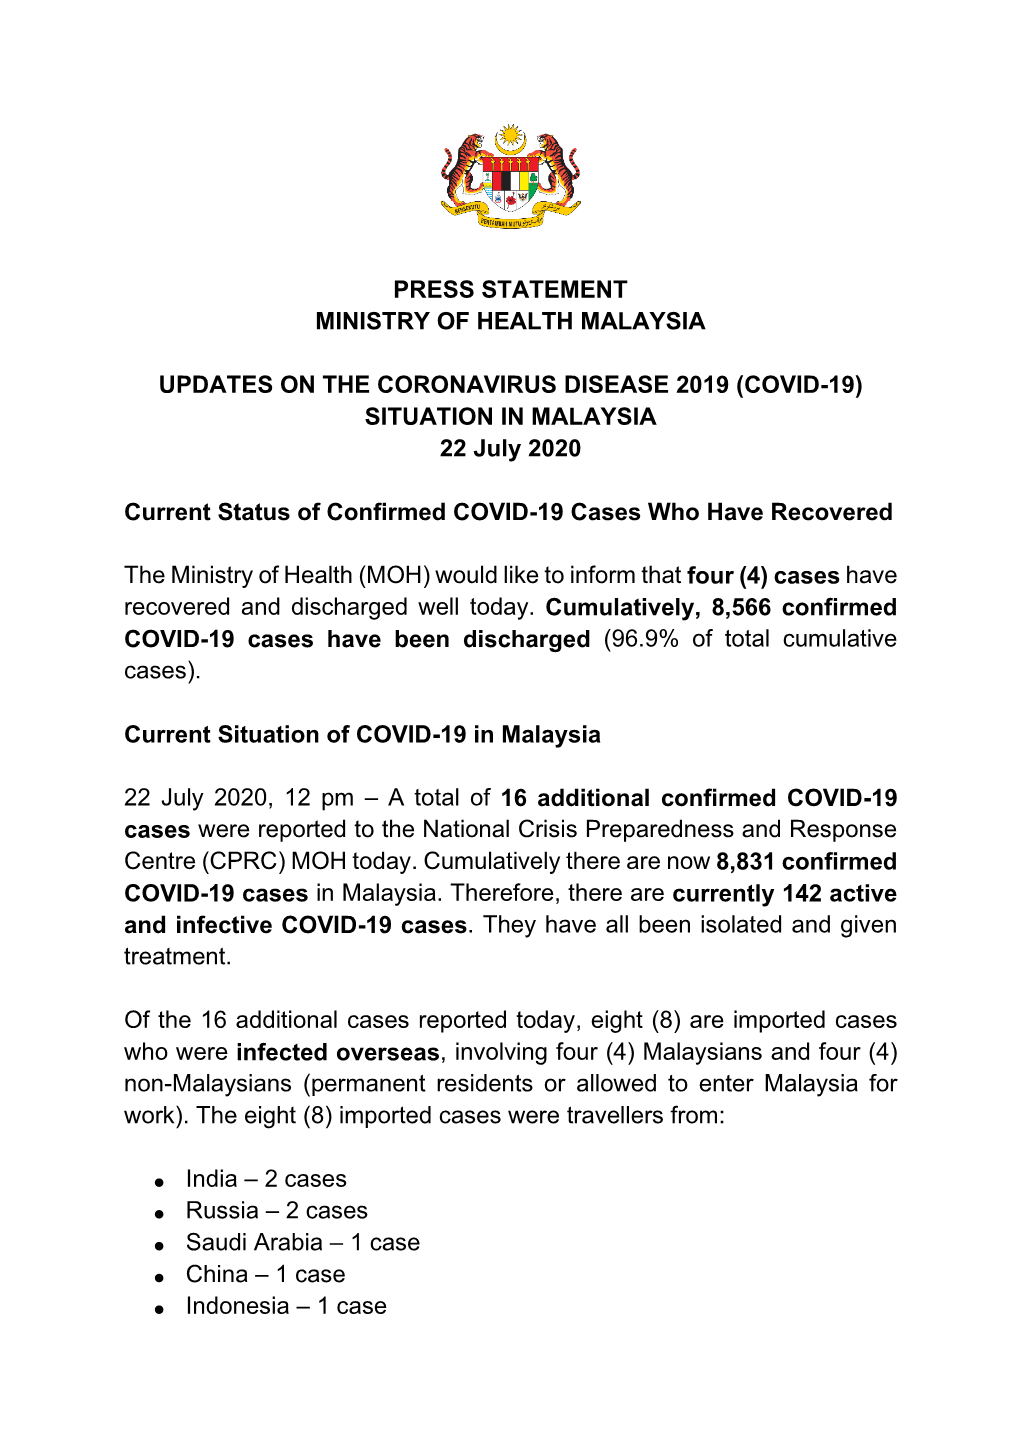 PRESS STATEMENT MINISTRY of HEALTH MALAYSIA UPDATES on the CORONAVIRUS DISEASE 2019 (COVID-19) SITUATION in MALAYSIA 22 July 20